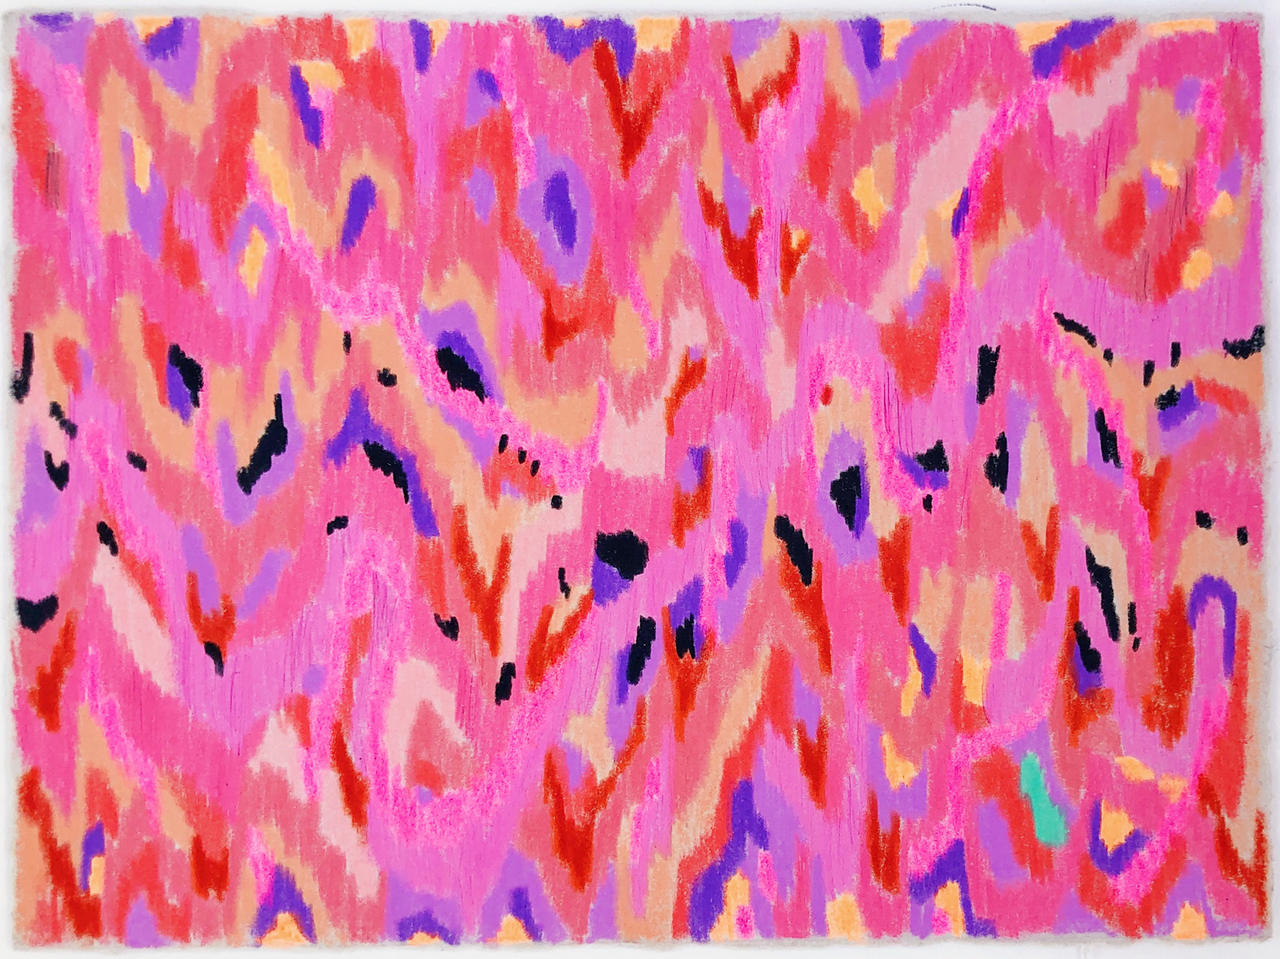 An abstract pink, red and purple toned painting.